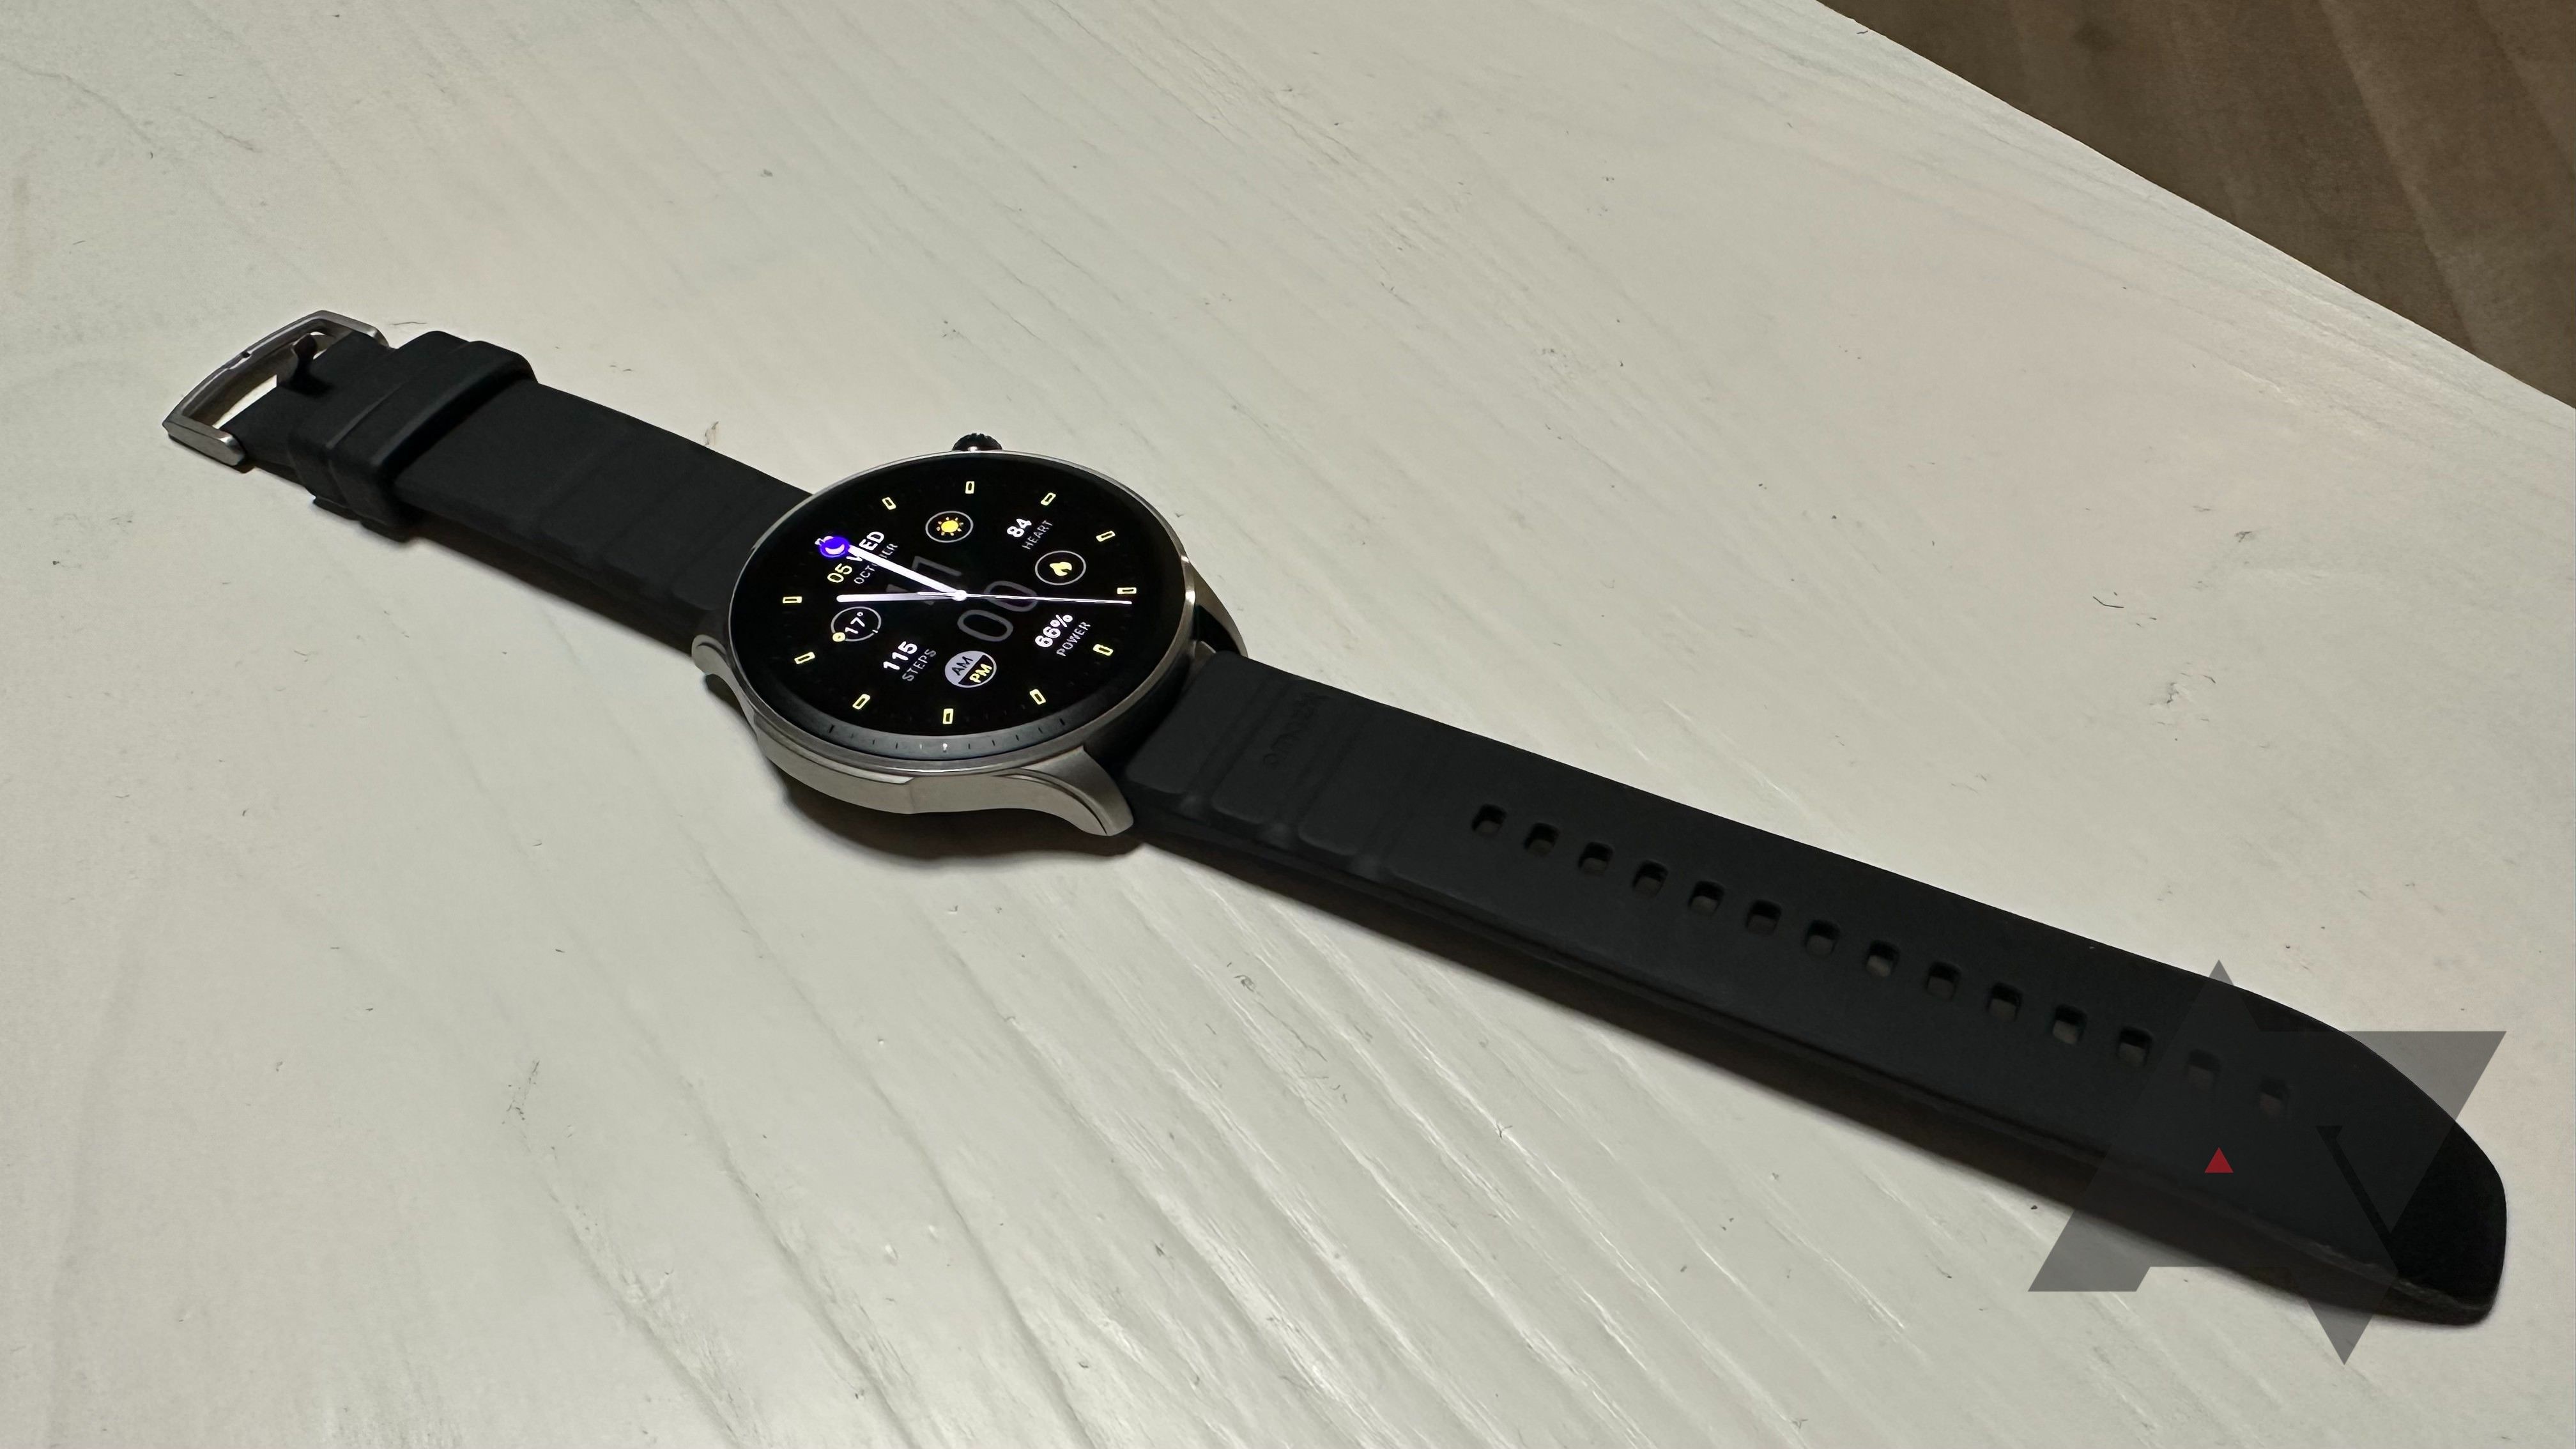 Amazfit's GTR 4 smartwatch, sitting on a table